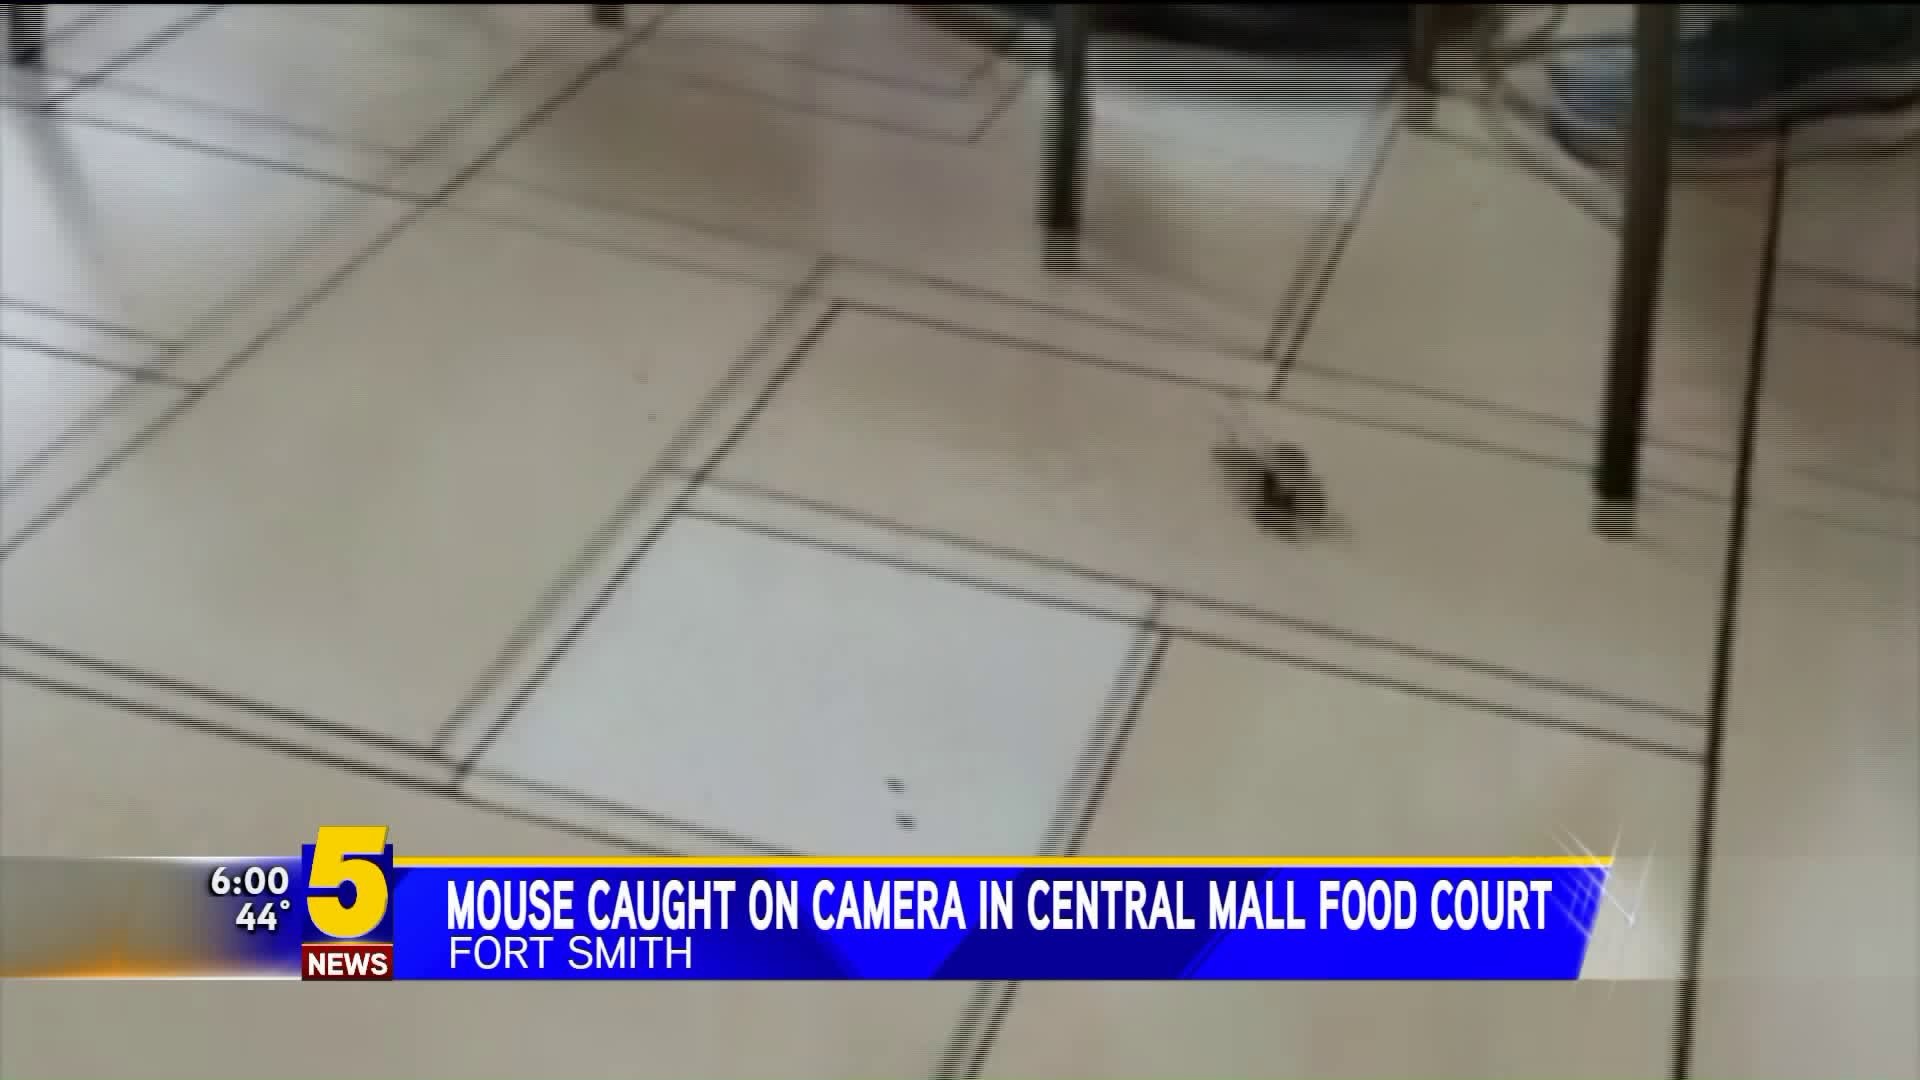 Mouse Caught On Camera In Central Mall Food Court